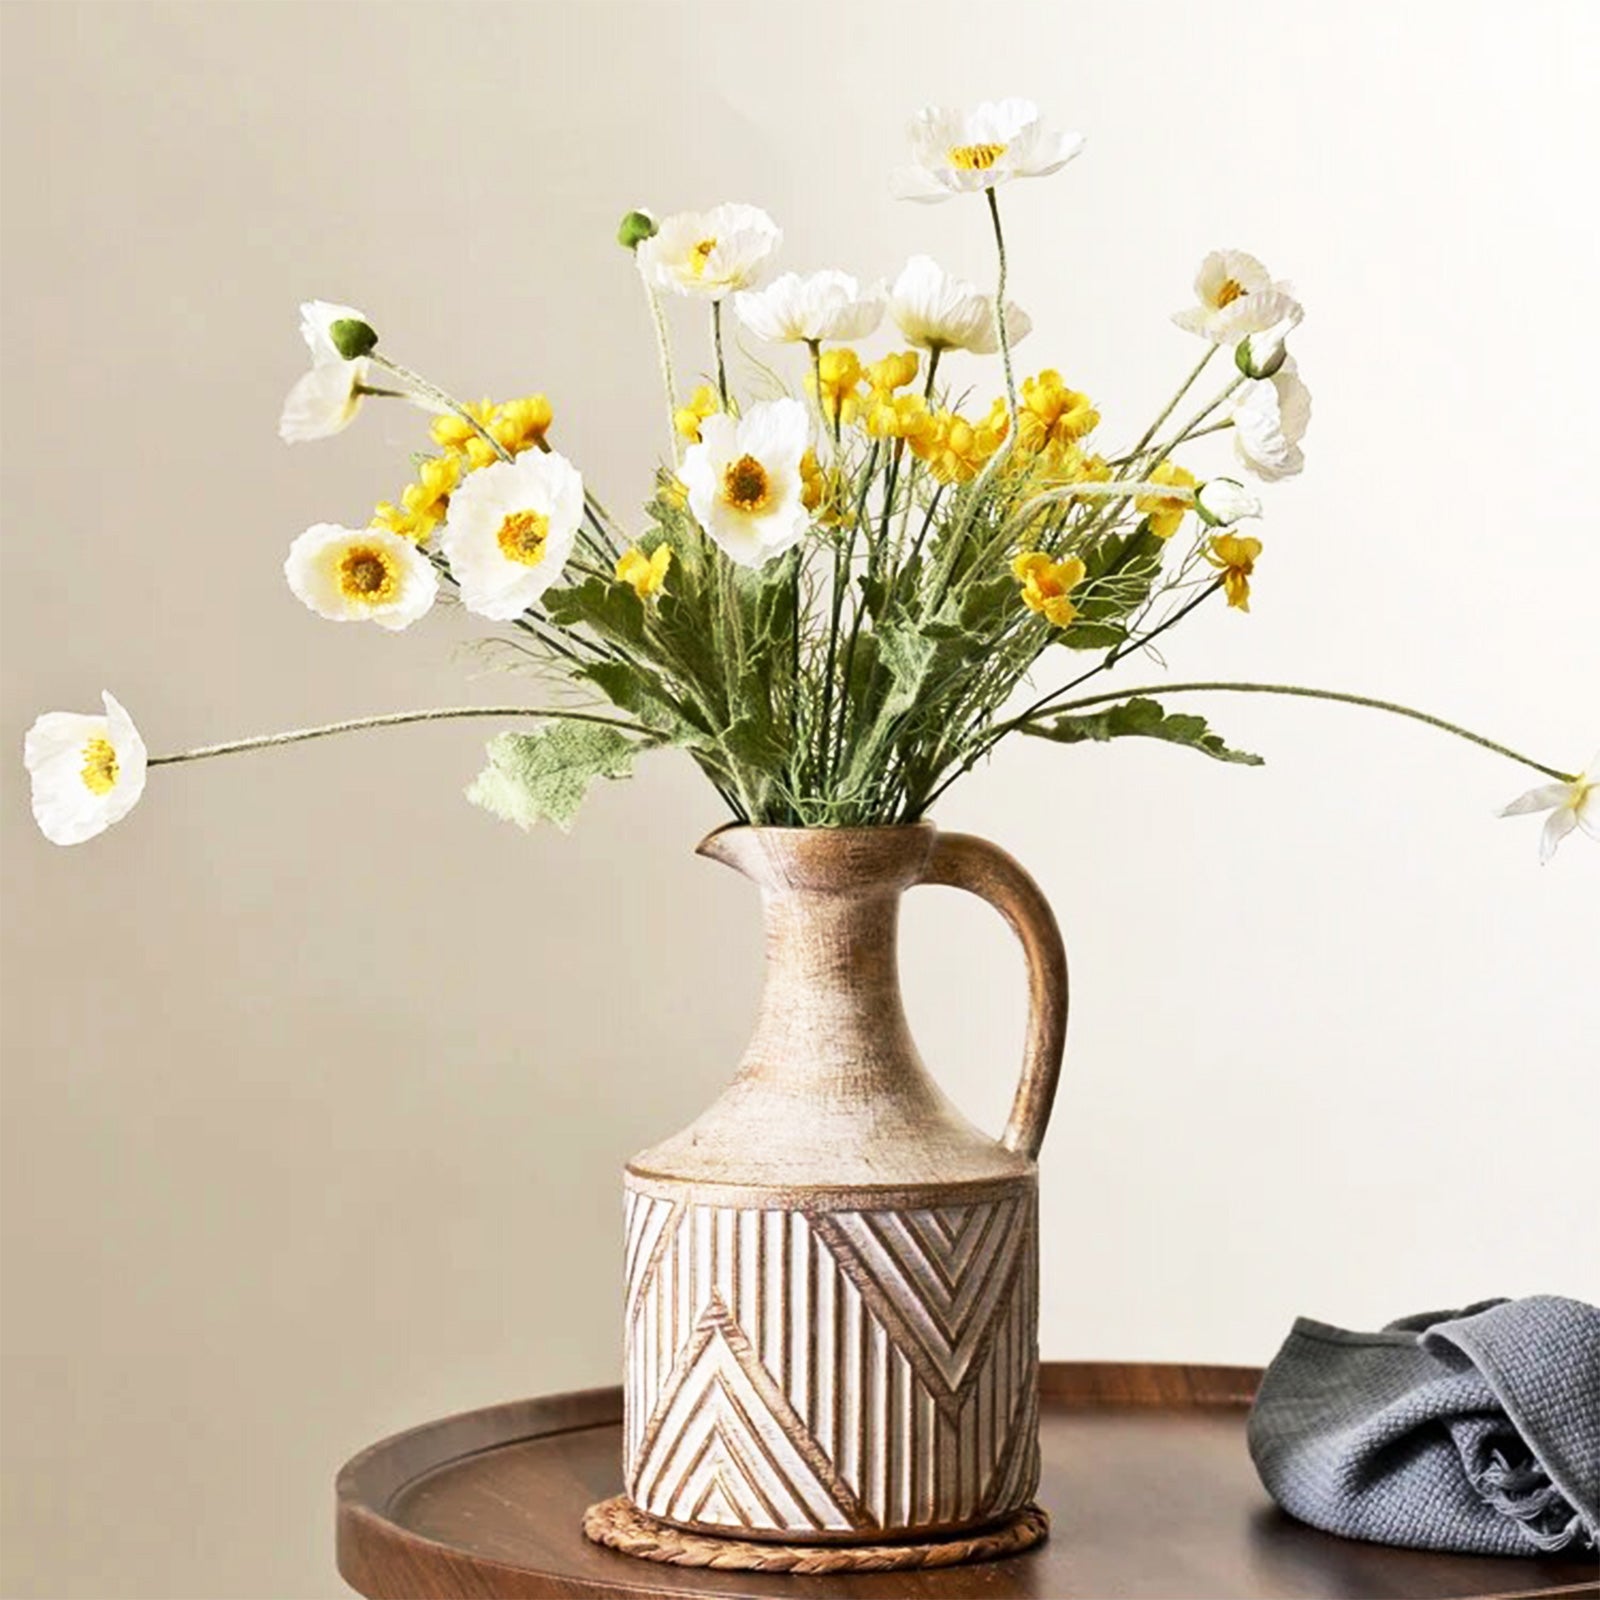 Rustic Look Retro Vase with Bold Striped Pattern